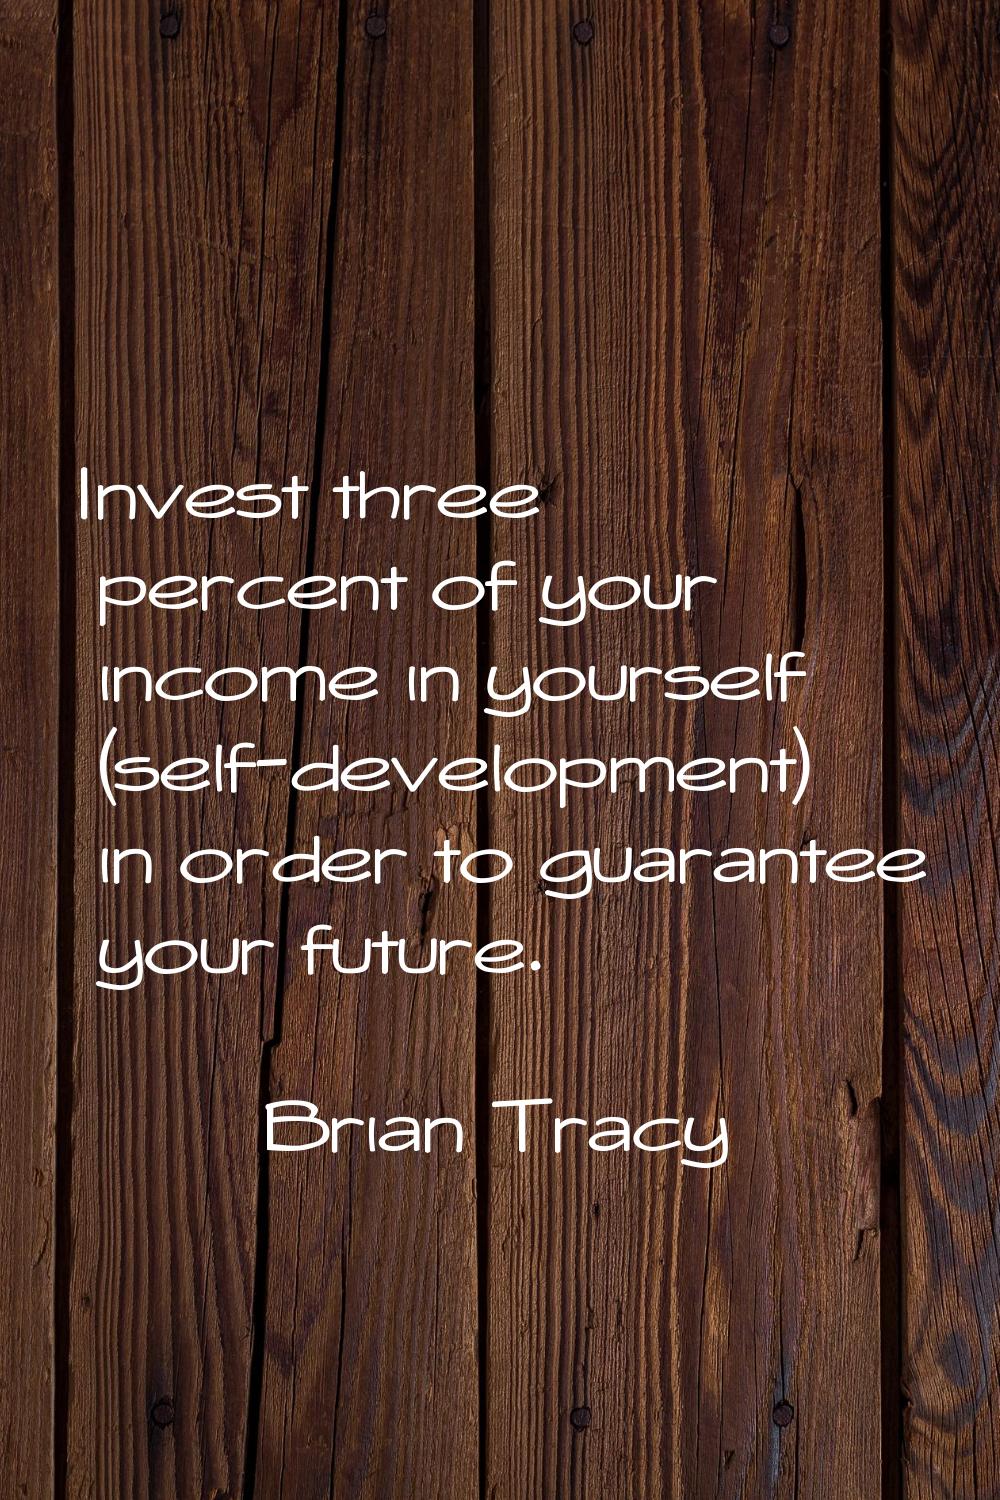 Invest three percent of your income in yourself (self-development) in order to guarantee your futur